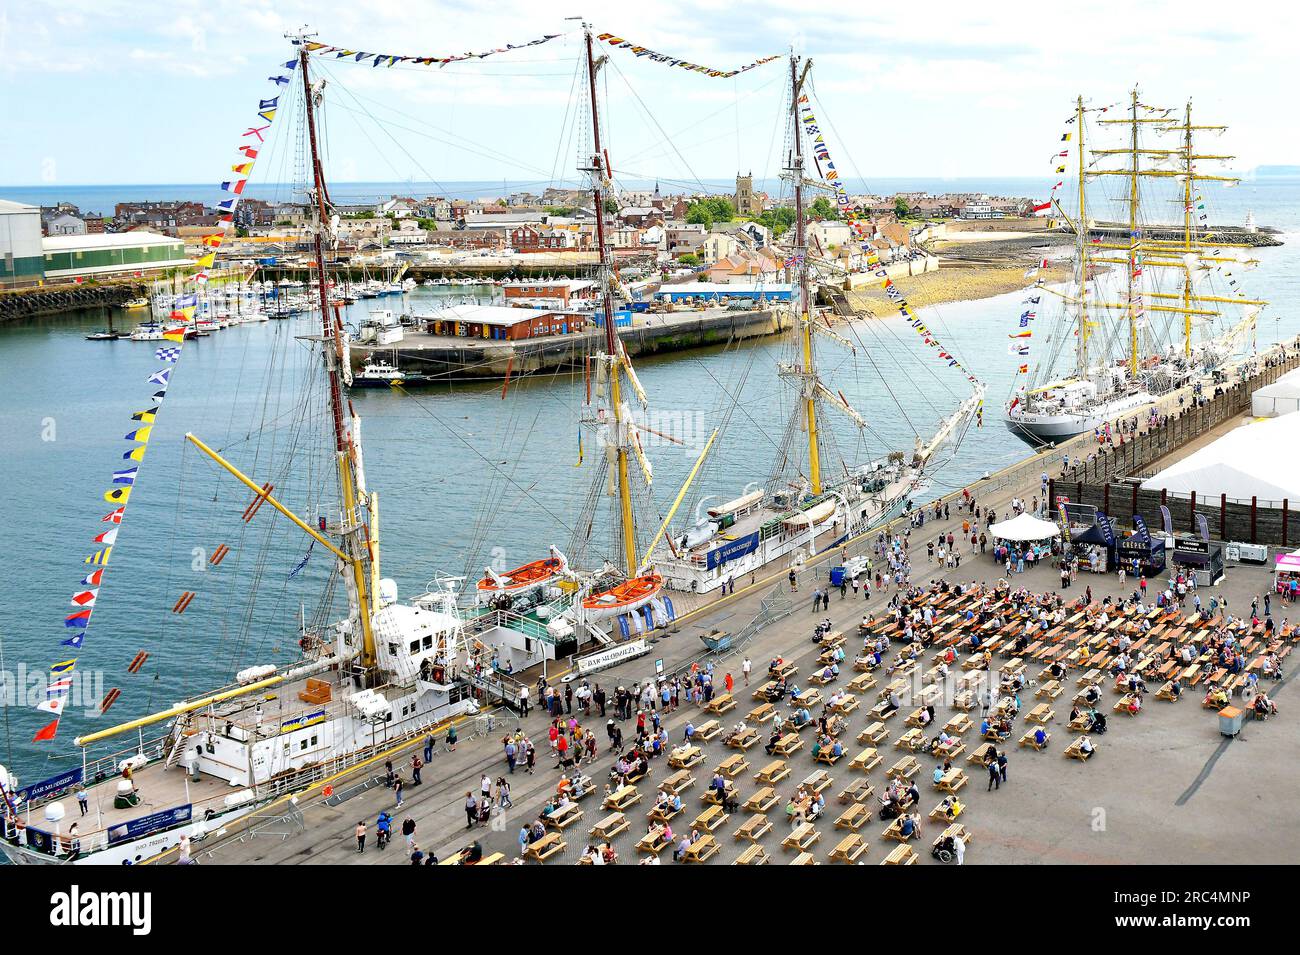 Hartlepool's 2023 Tall ships race, taking place across 3 countries, starting in June from the Netherlands to the UK finishing in Norway in August.. Stock Photo